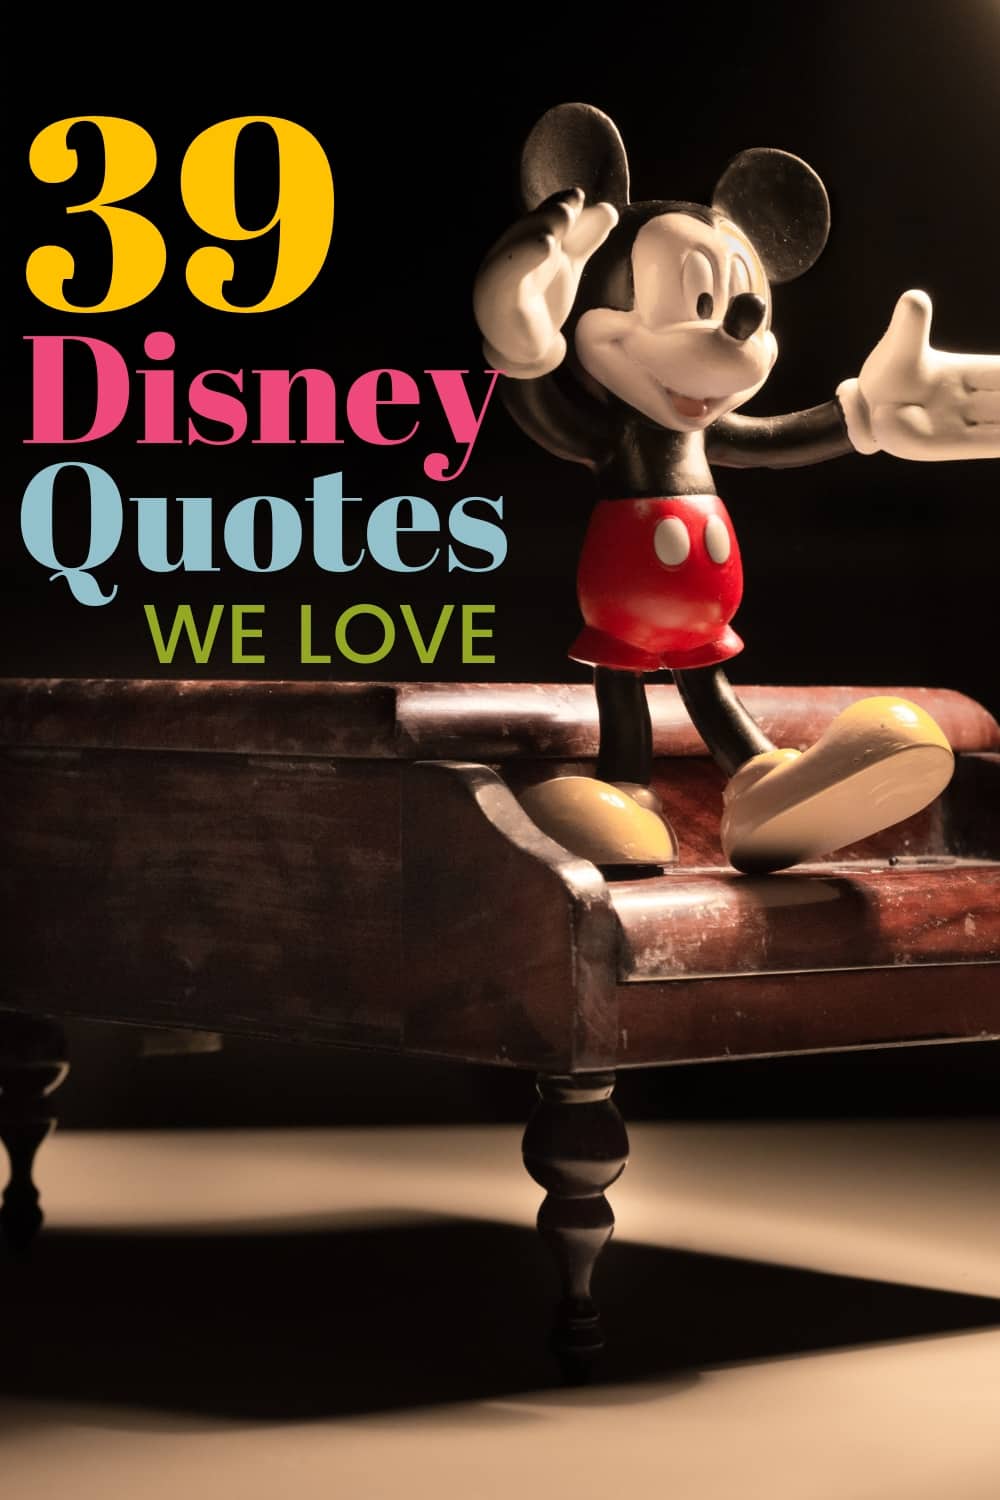 A collection of the most inspirational, funny, and feel-good Disney quotes. From Cinderella, Winnie The Pooh to The Lion King, and Frozen. #quotes #disney #walt #waltdisney #funnyquotes #cutequotes ♡ cheerfulcook.com via @cheerfulcook